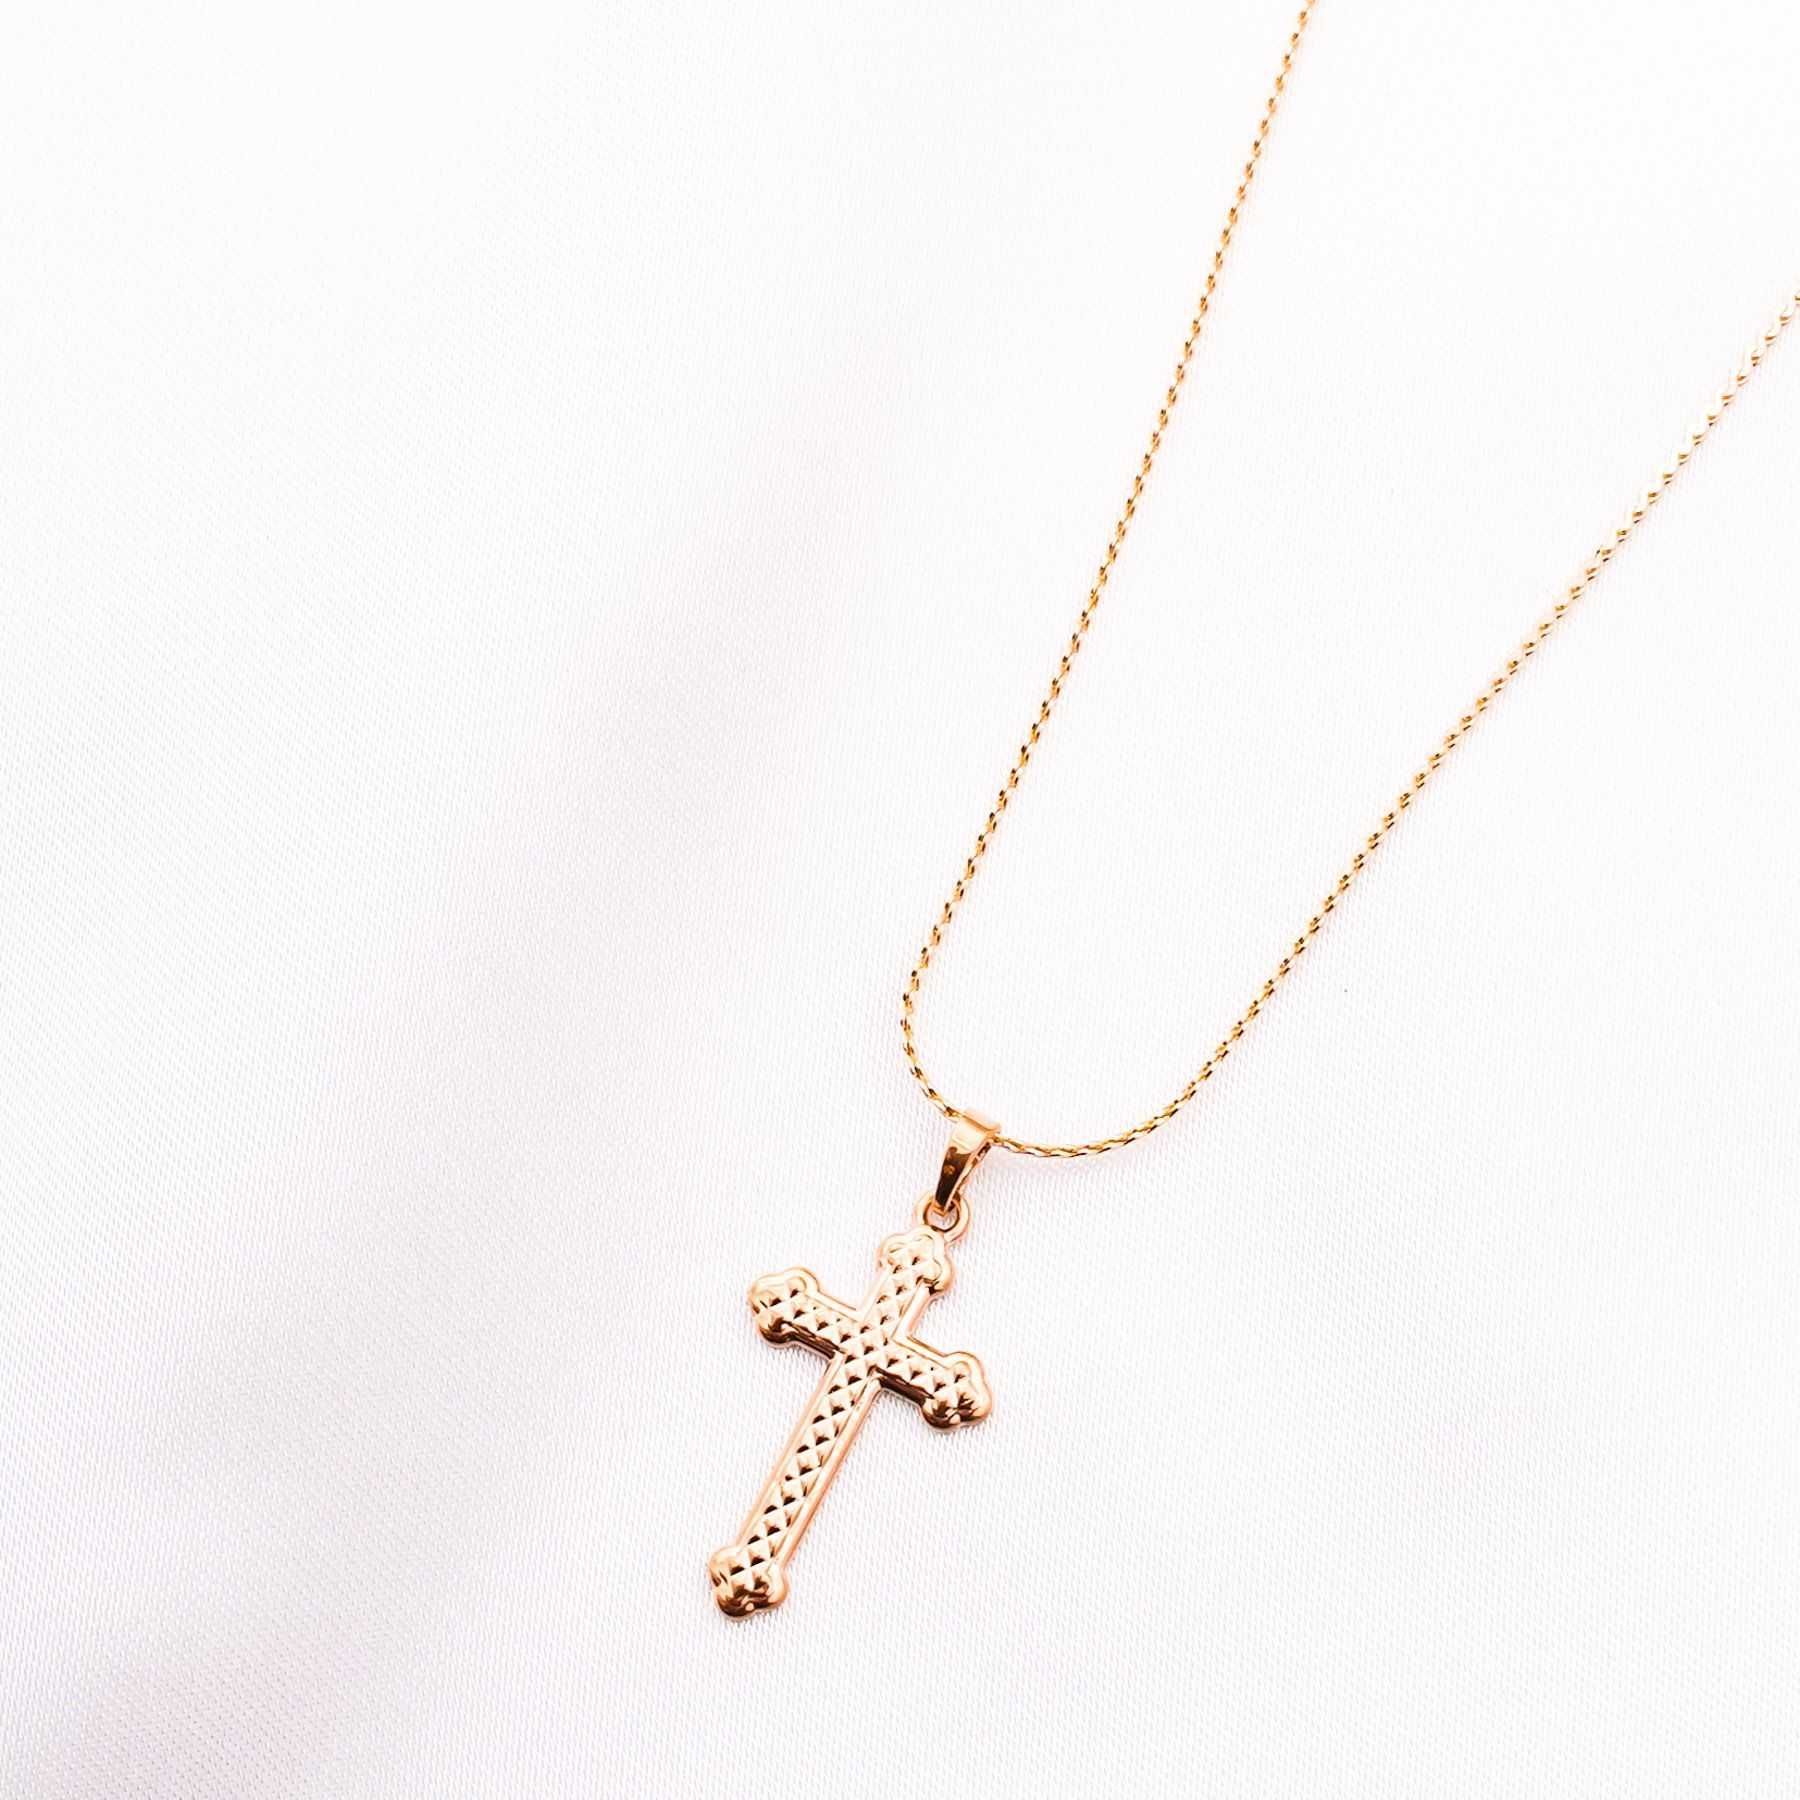 CROSS NECKLACE - ROSE GOLD